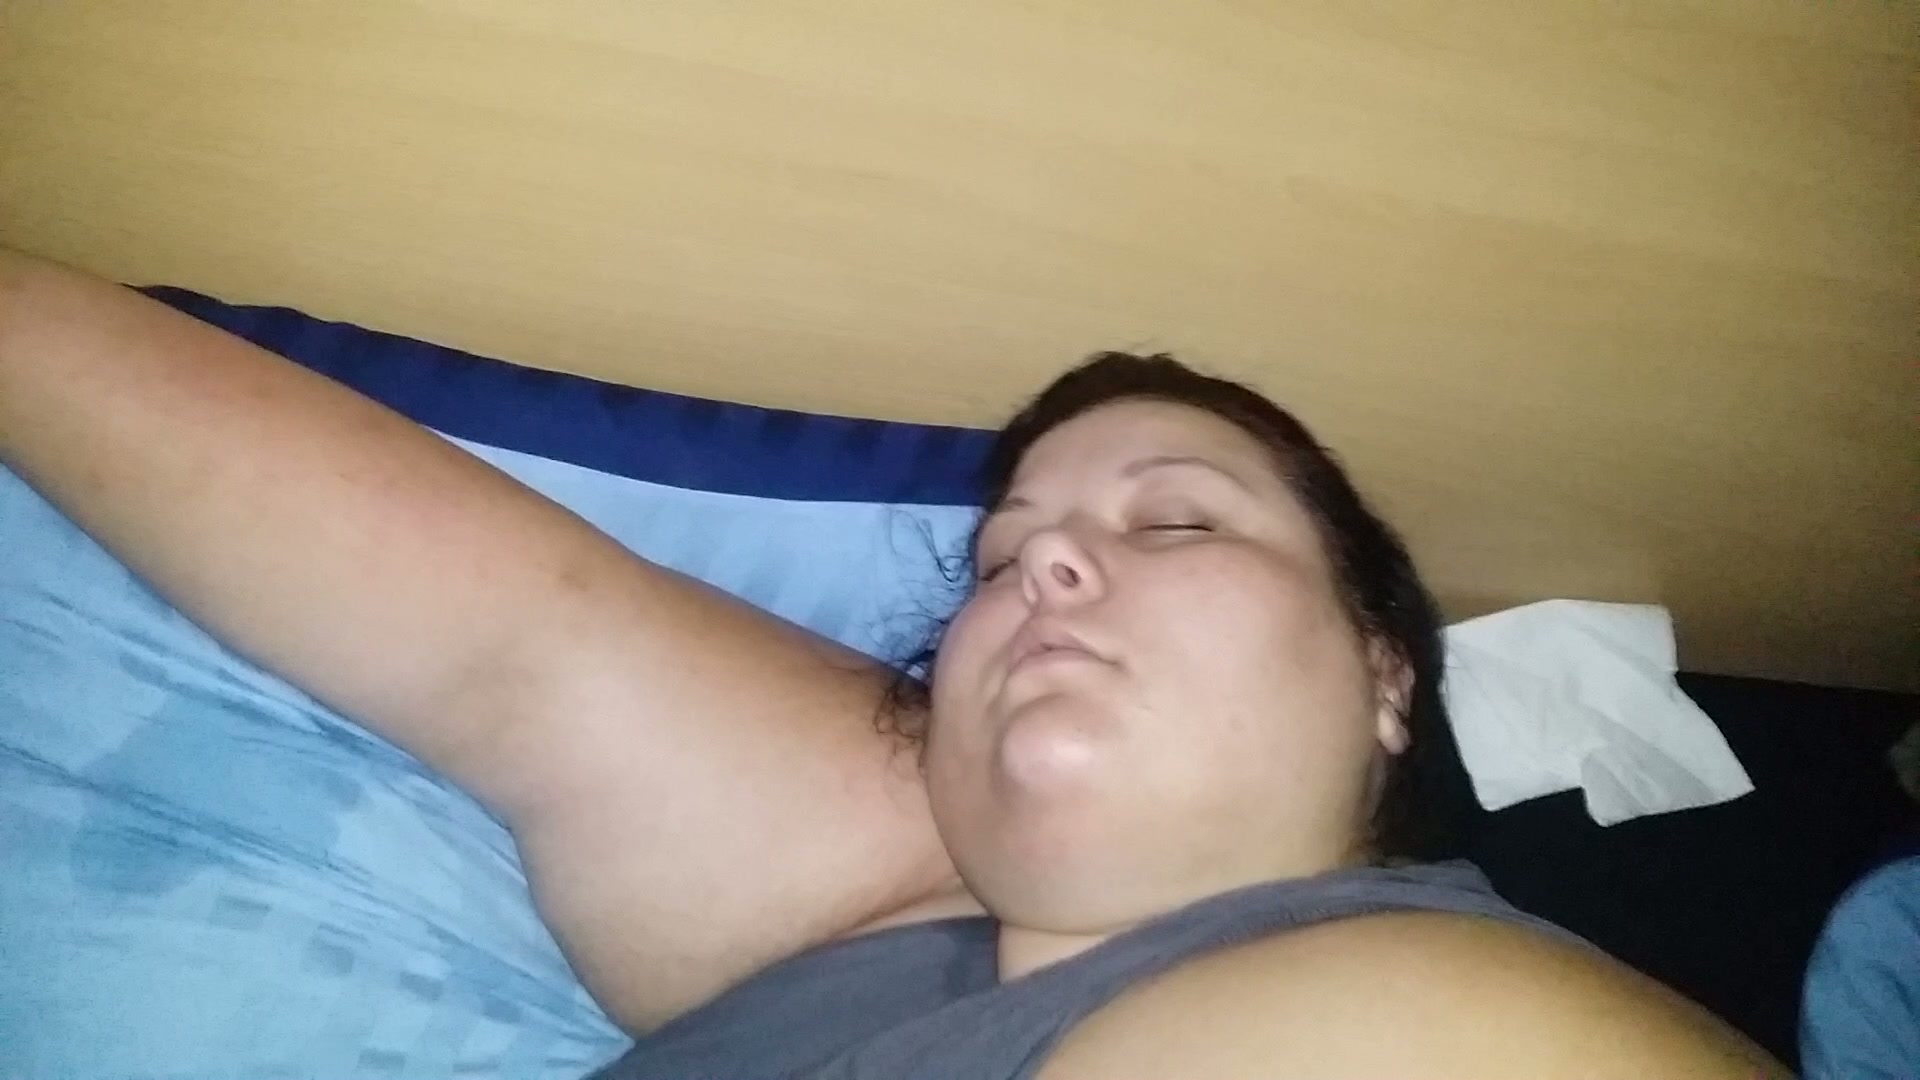 I love to cum all over my chubby wifes ass while shes sleeping